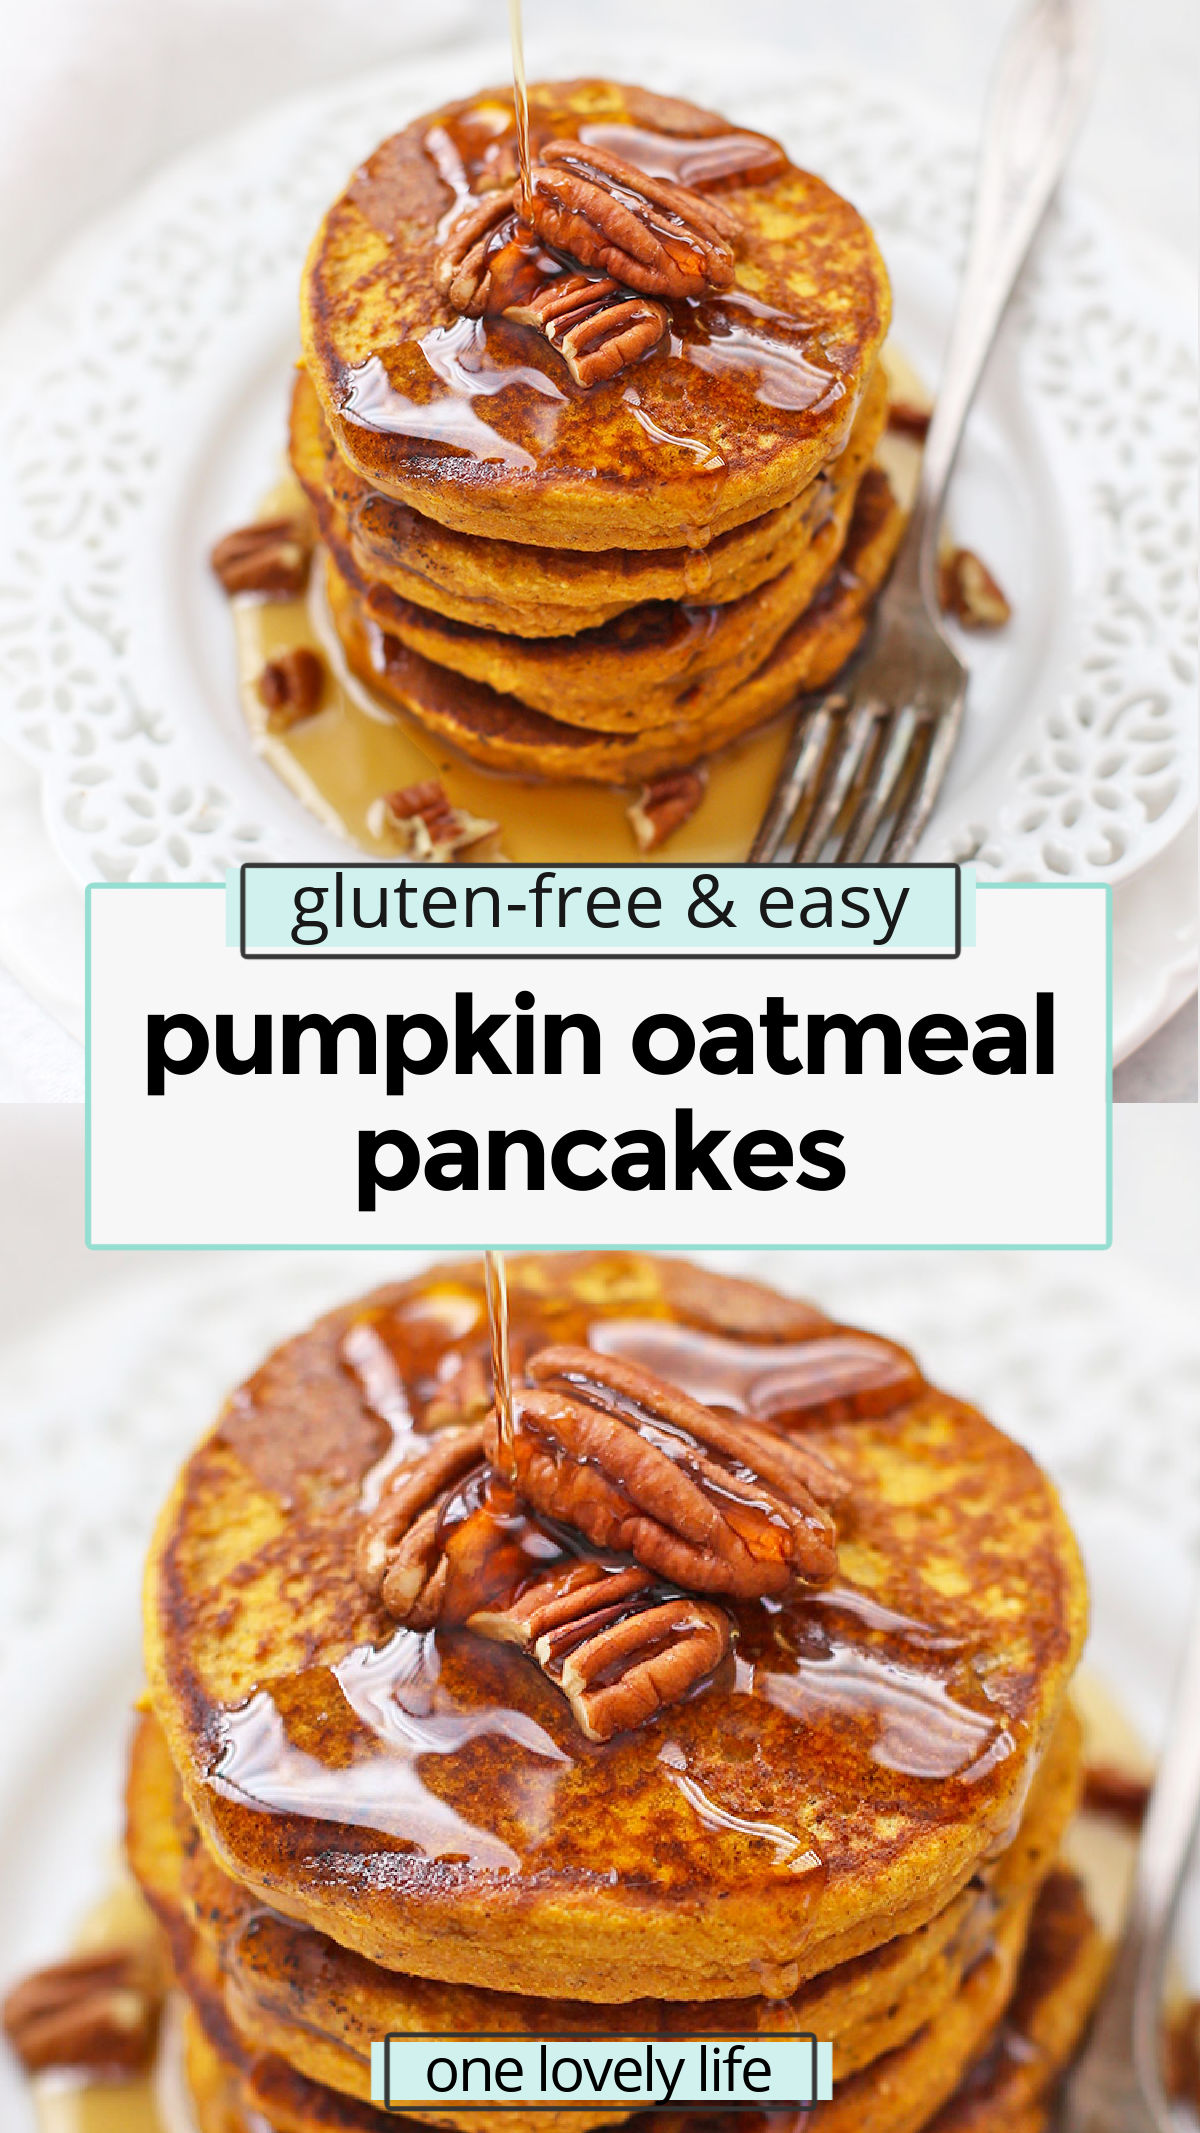 Blender Pumpkin Oatmeal Pancakes - These healthy pumpkin pancakes are gluten & dairy free. SO EASY, since they're made in the blender! It's the BEST pumpkin pancakes recipe! // blender pancakes // pumpkin pancakes // pumpkin oatmeal pancakes // gluten free pumpkin pancakes // pumpkin oat pancakes // blender pancakes recipe // blender pumpkin oatmeal pancakes // healthy pumpkin oatmeal pancakes // gluten free pumpkin oatmeal pancakes